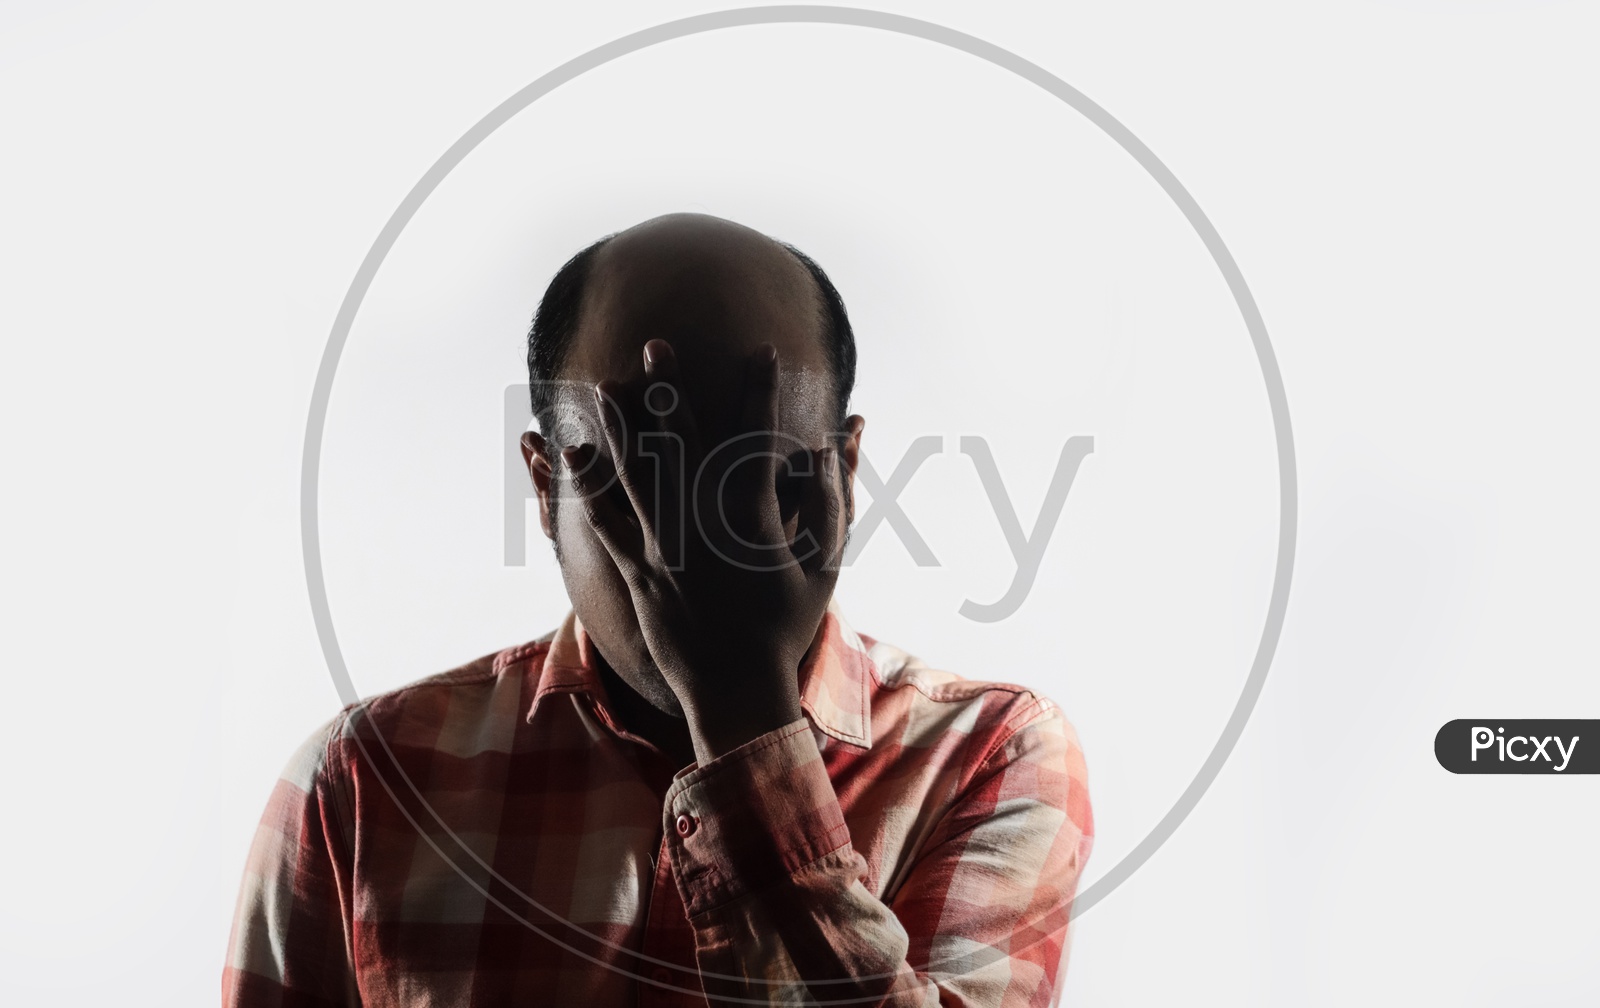 Bald Man Covering His Face In Shame In White Background With Space For Text